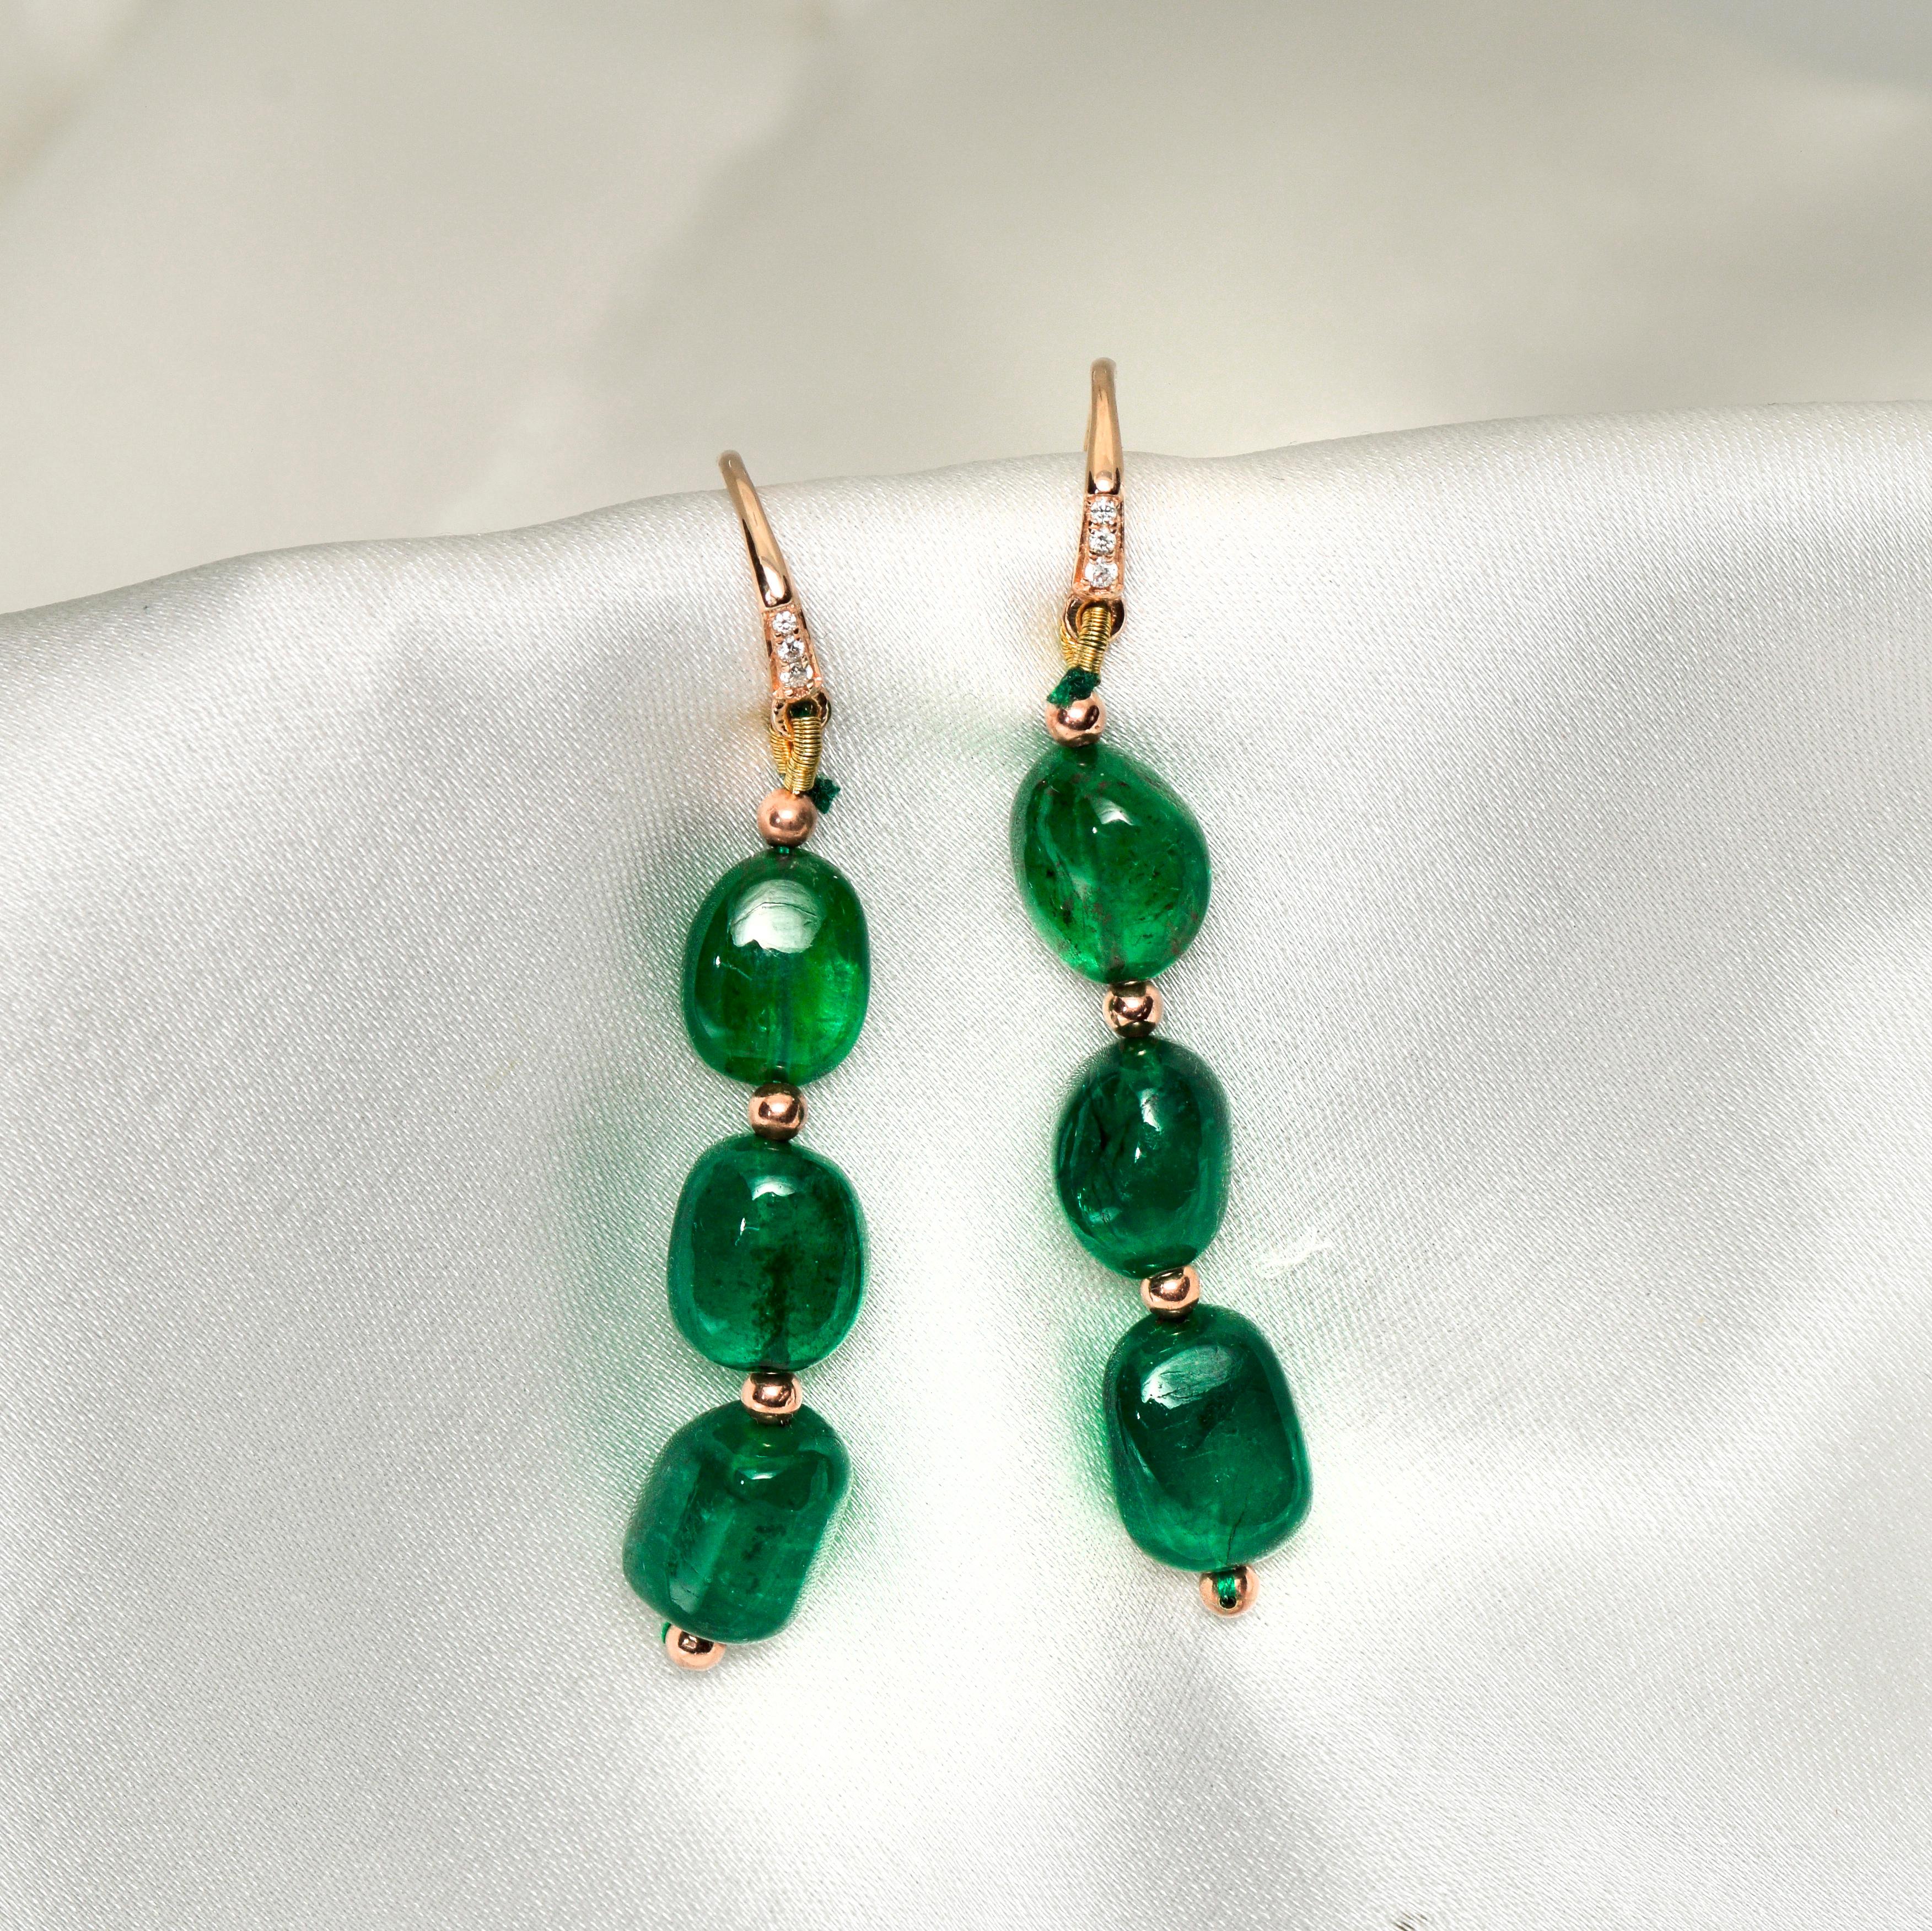 **One IGI 14K Rose Gold 20.50 Ct Emerald&Diamonds Antique Art Deco Style Hook Earrings **

Pairs of IGI-Certified natural green Emerald as the center stone weighing 20.50 ct set with the FG VS accent diamonds weighing 0.04 ct on the 14K white gold